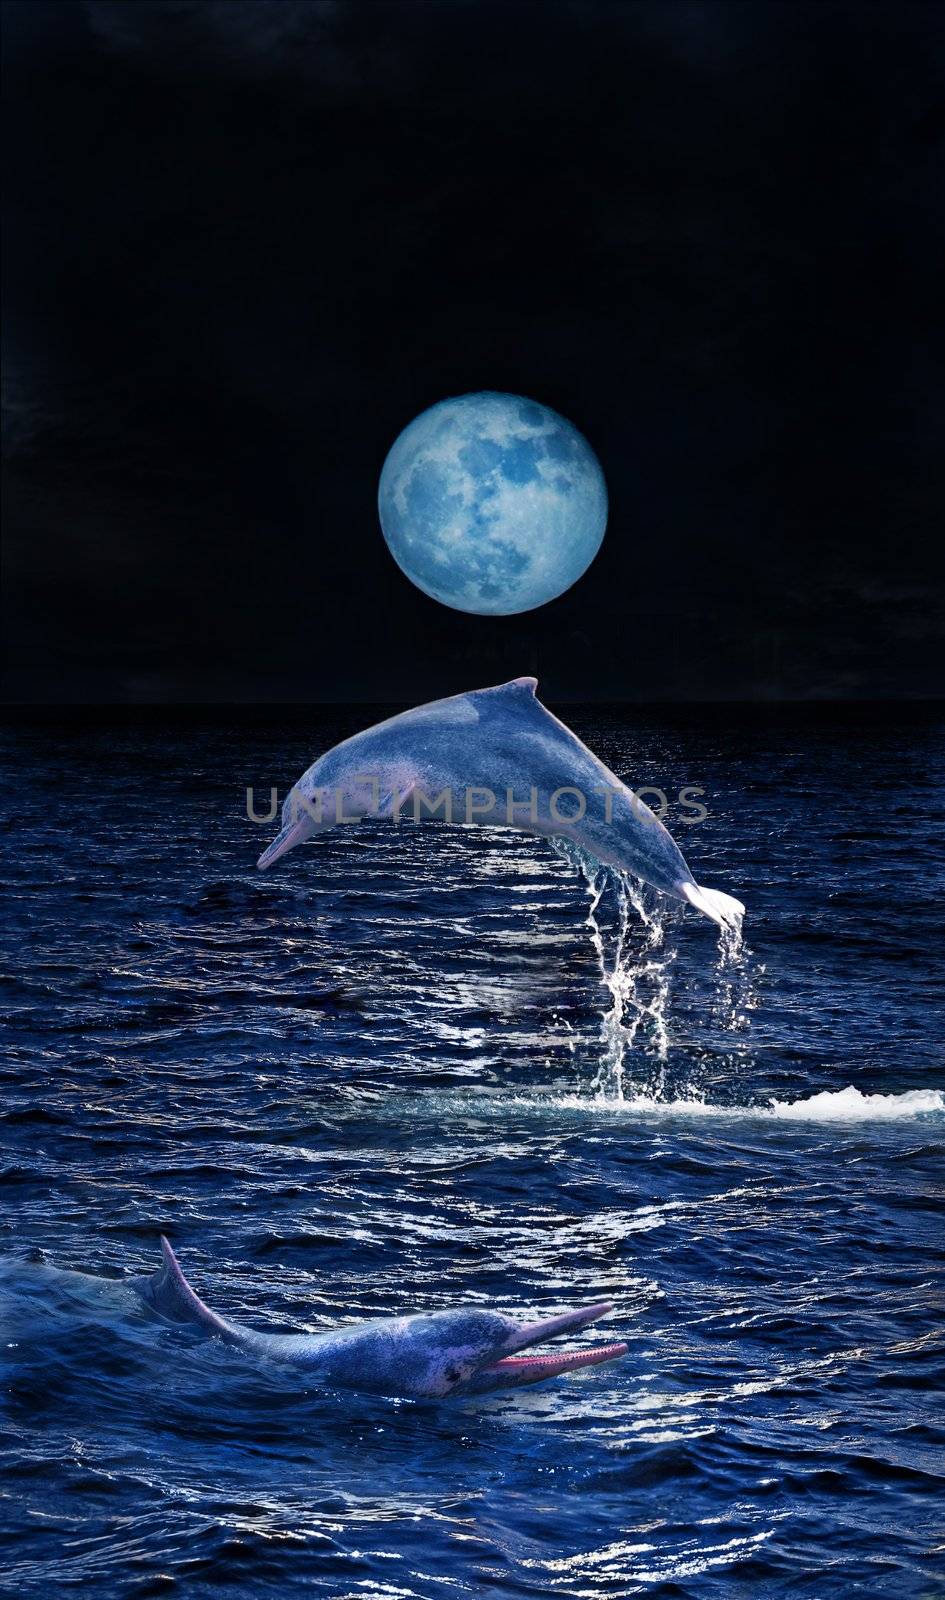 Dolphins playing in the moonlight